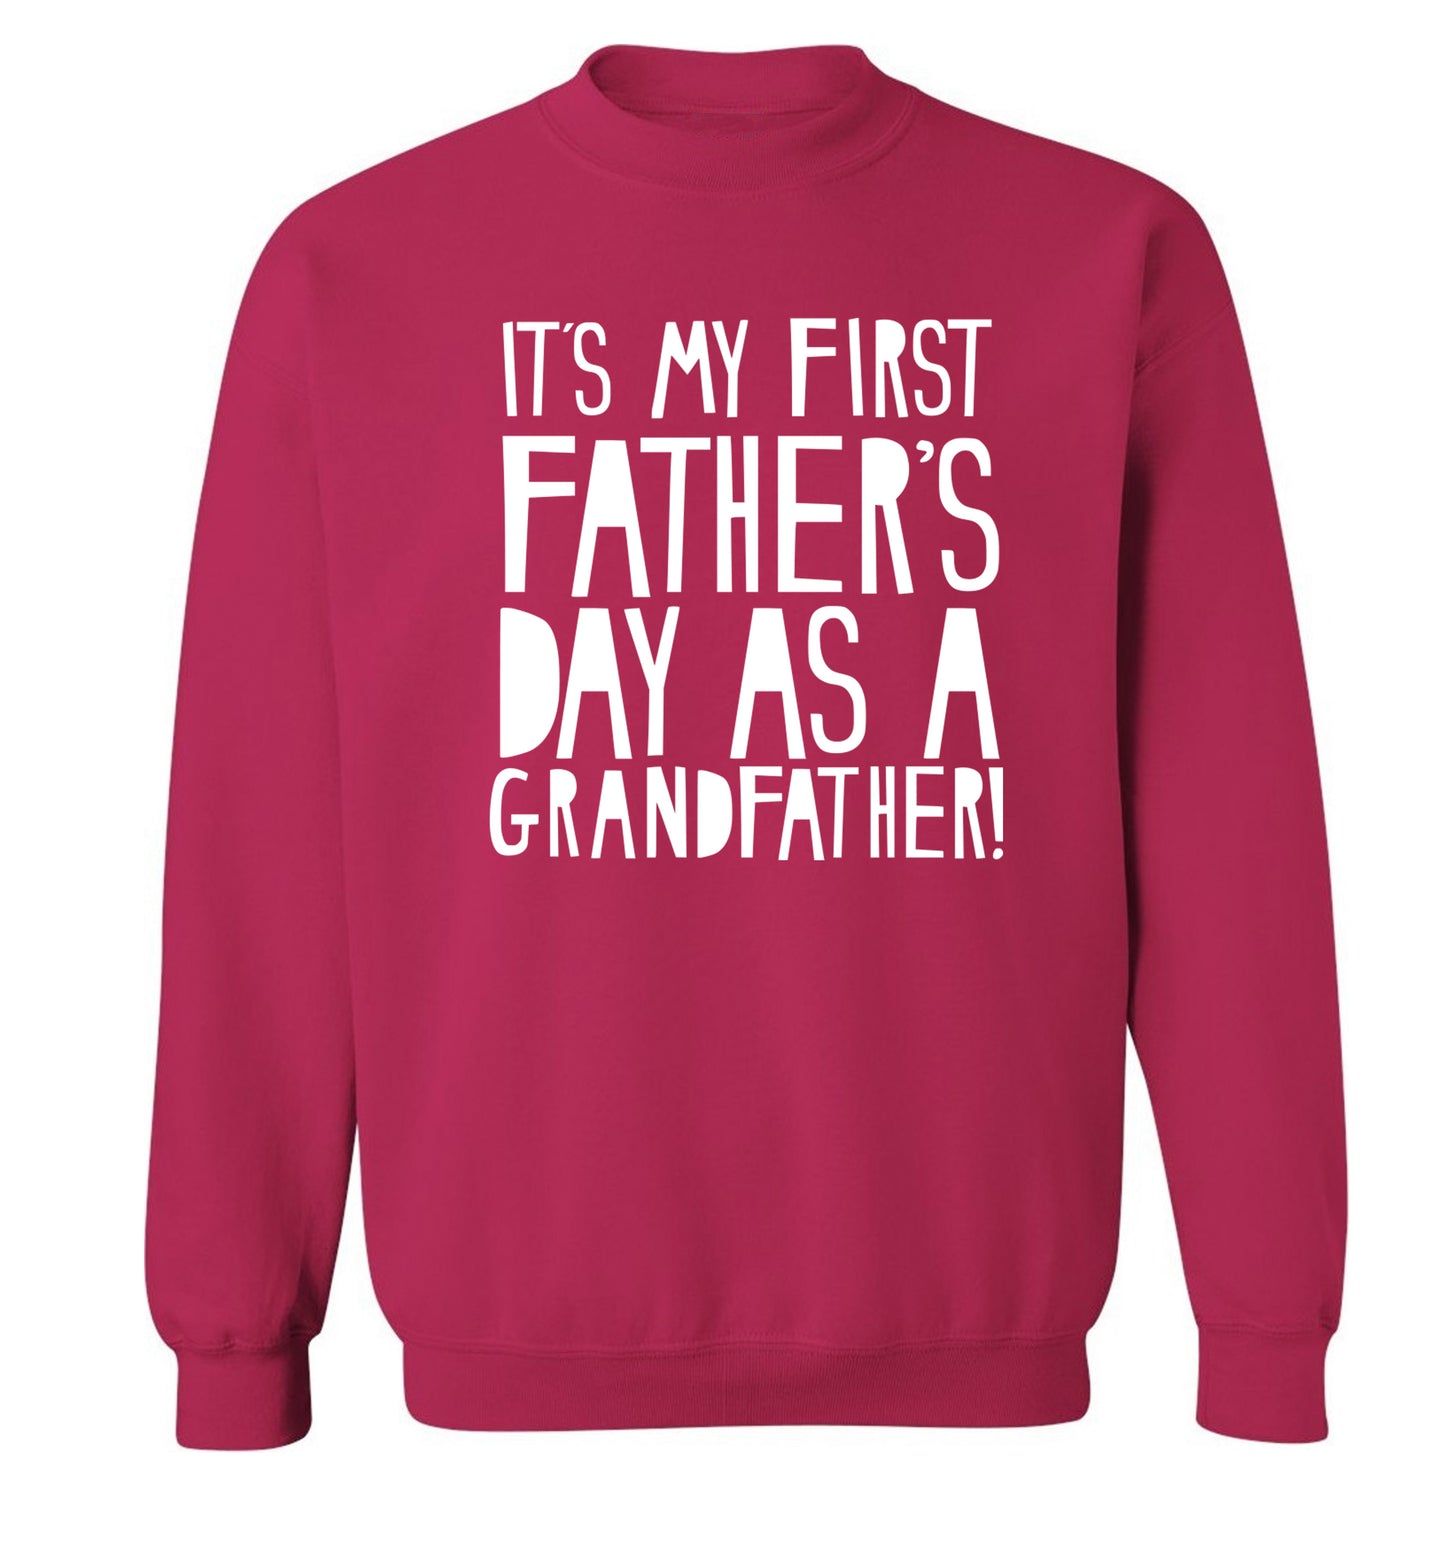 It's my first Father's Day as a Grandfather! Adult's unisex pink Sweater 2XL